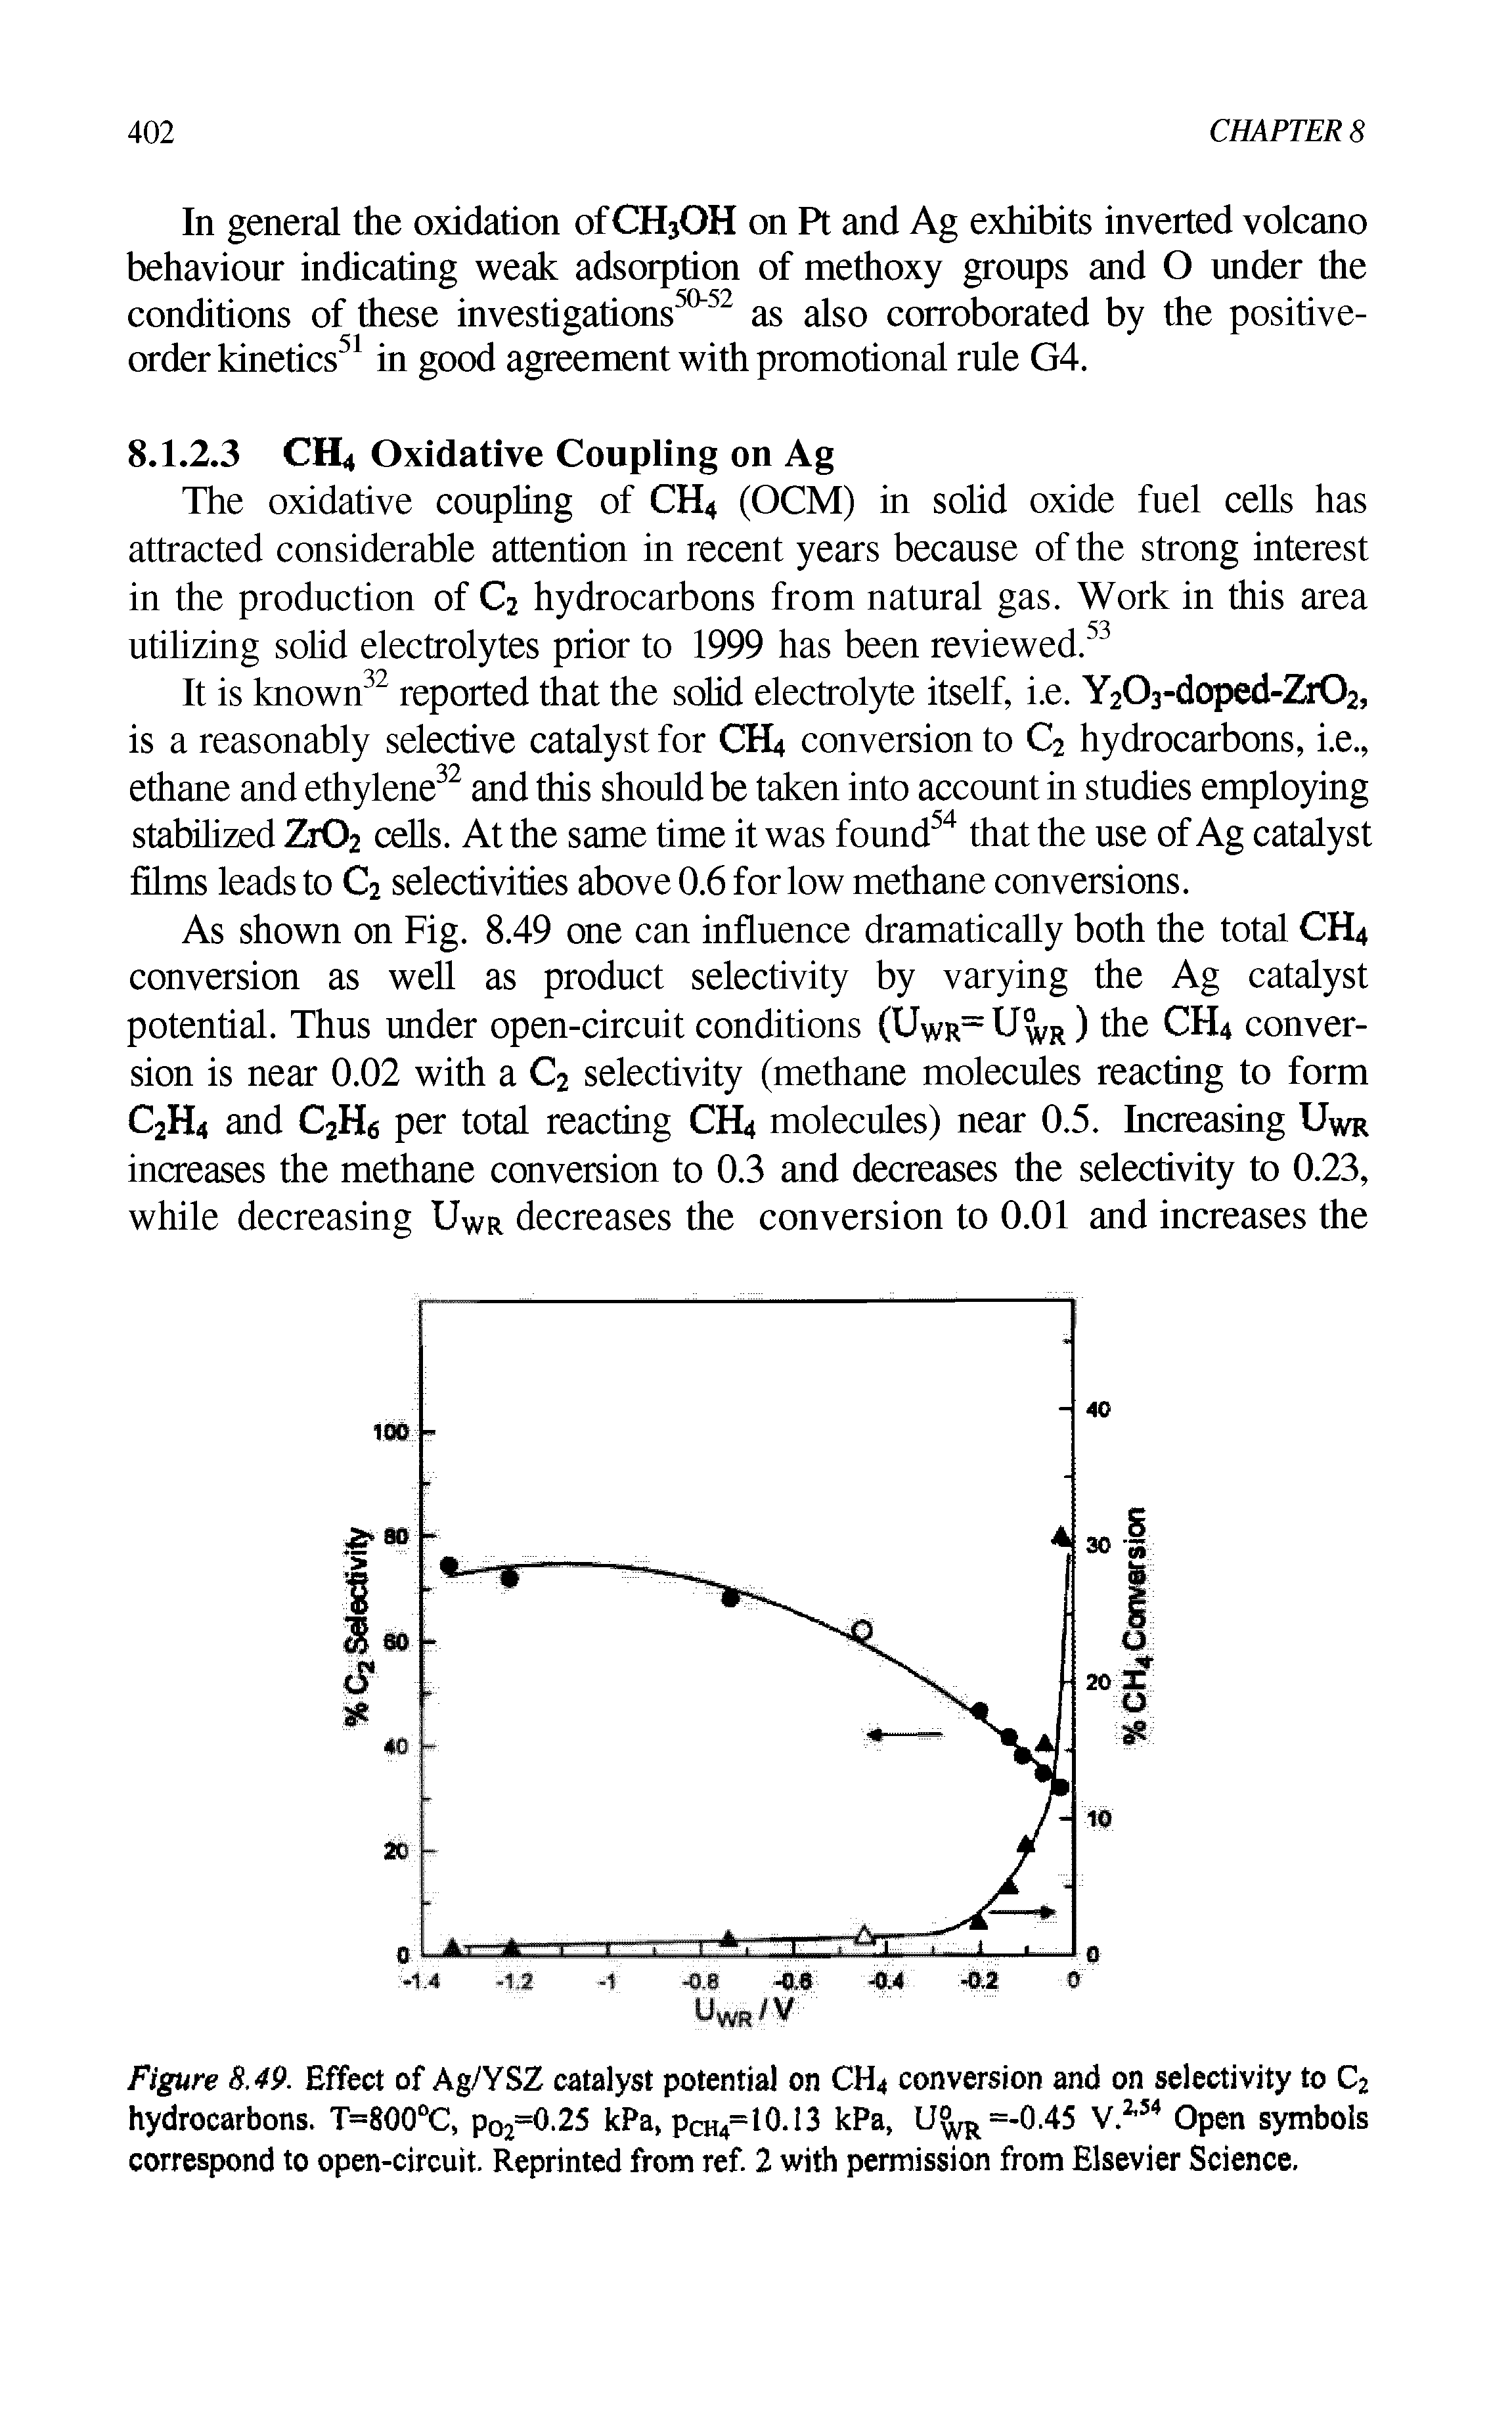 Figure 8,49. Effect of Ag/YSZ catalyst potential on CH4 conversion and on selectivity to C2 hydrocarbons. T=800°C, pO2=0.25 kPa, pCH4=lO.I3 kPa, U R=-0.45 V.2,54 Open symbols correspond to open-circuit. Reprinted from ref. 2 with permission from Elsevier Science.